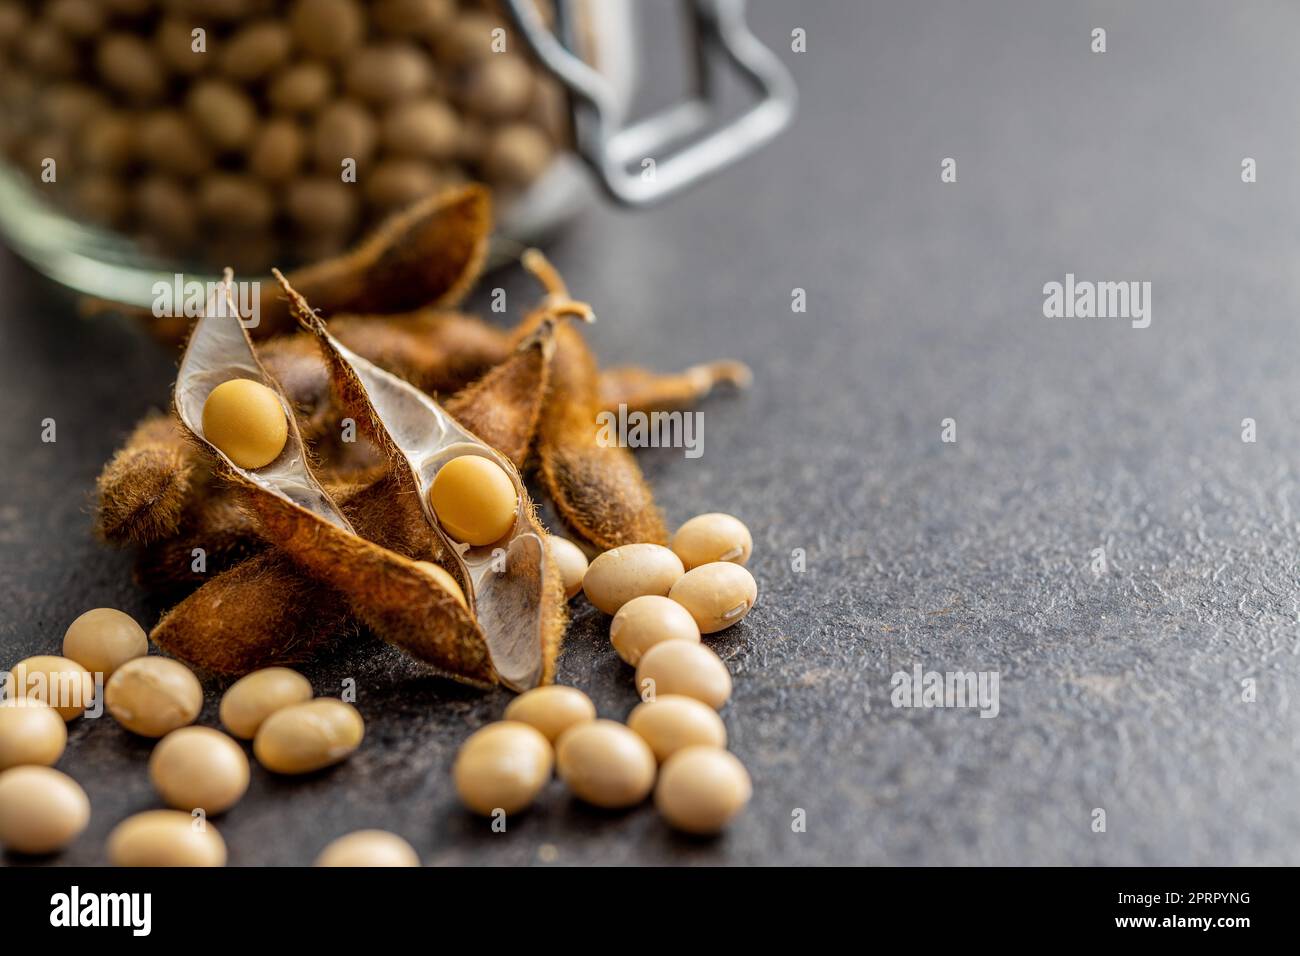 Soy beans. Dried soybean pod on black table. Stock Photo